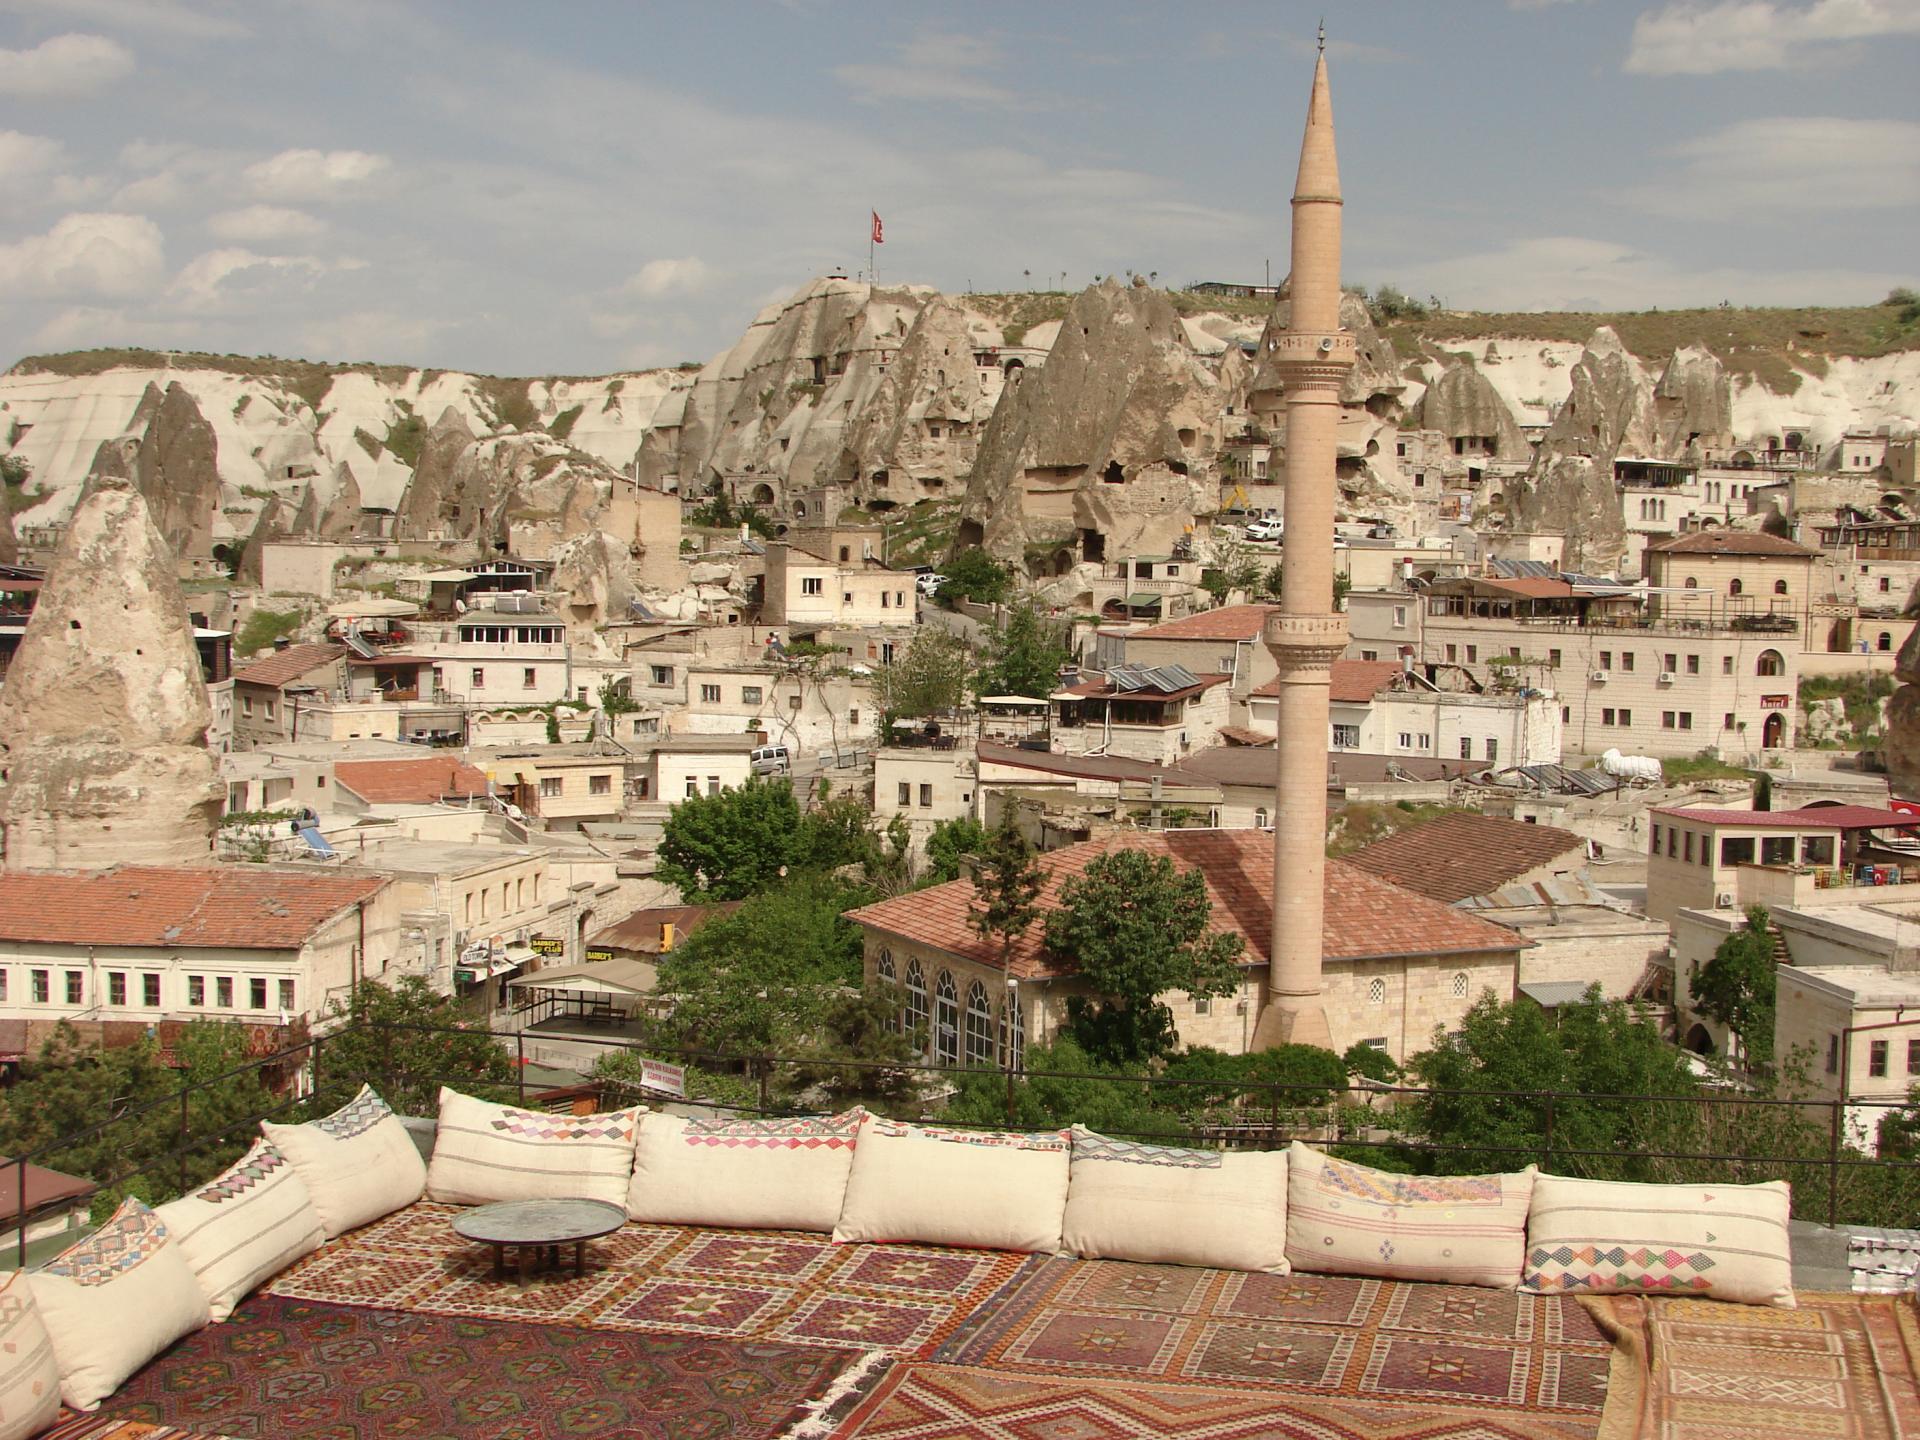 How to choose a hotel in Cappadocia?